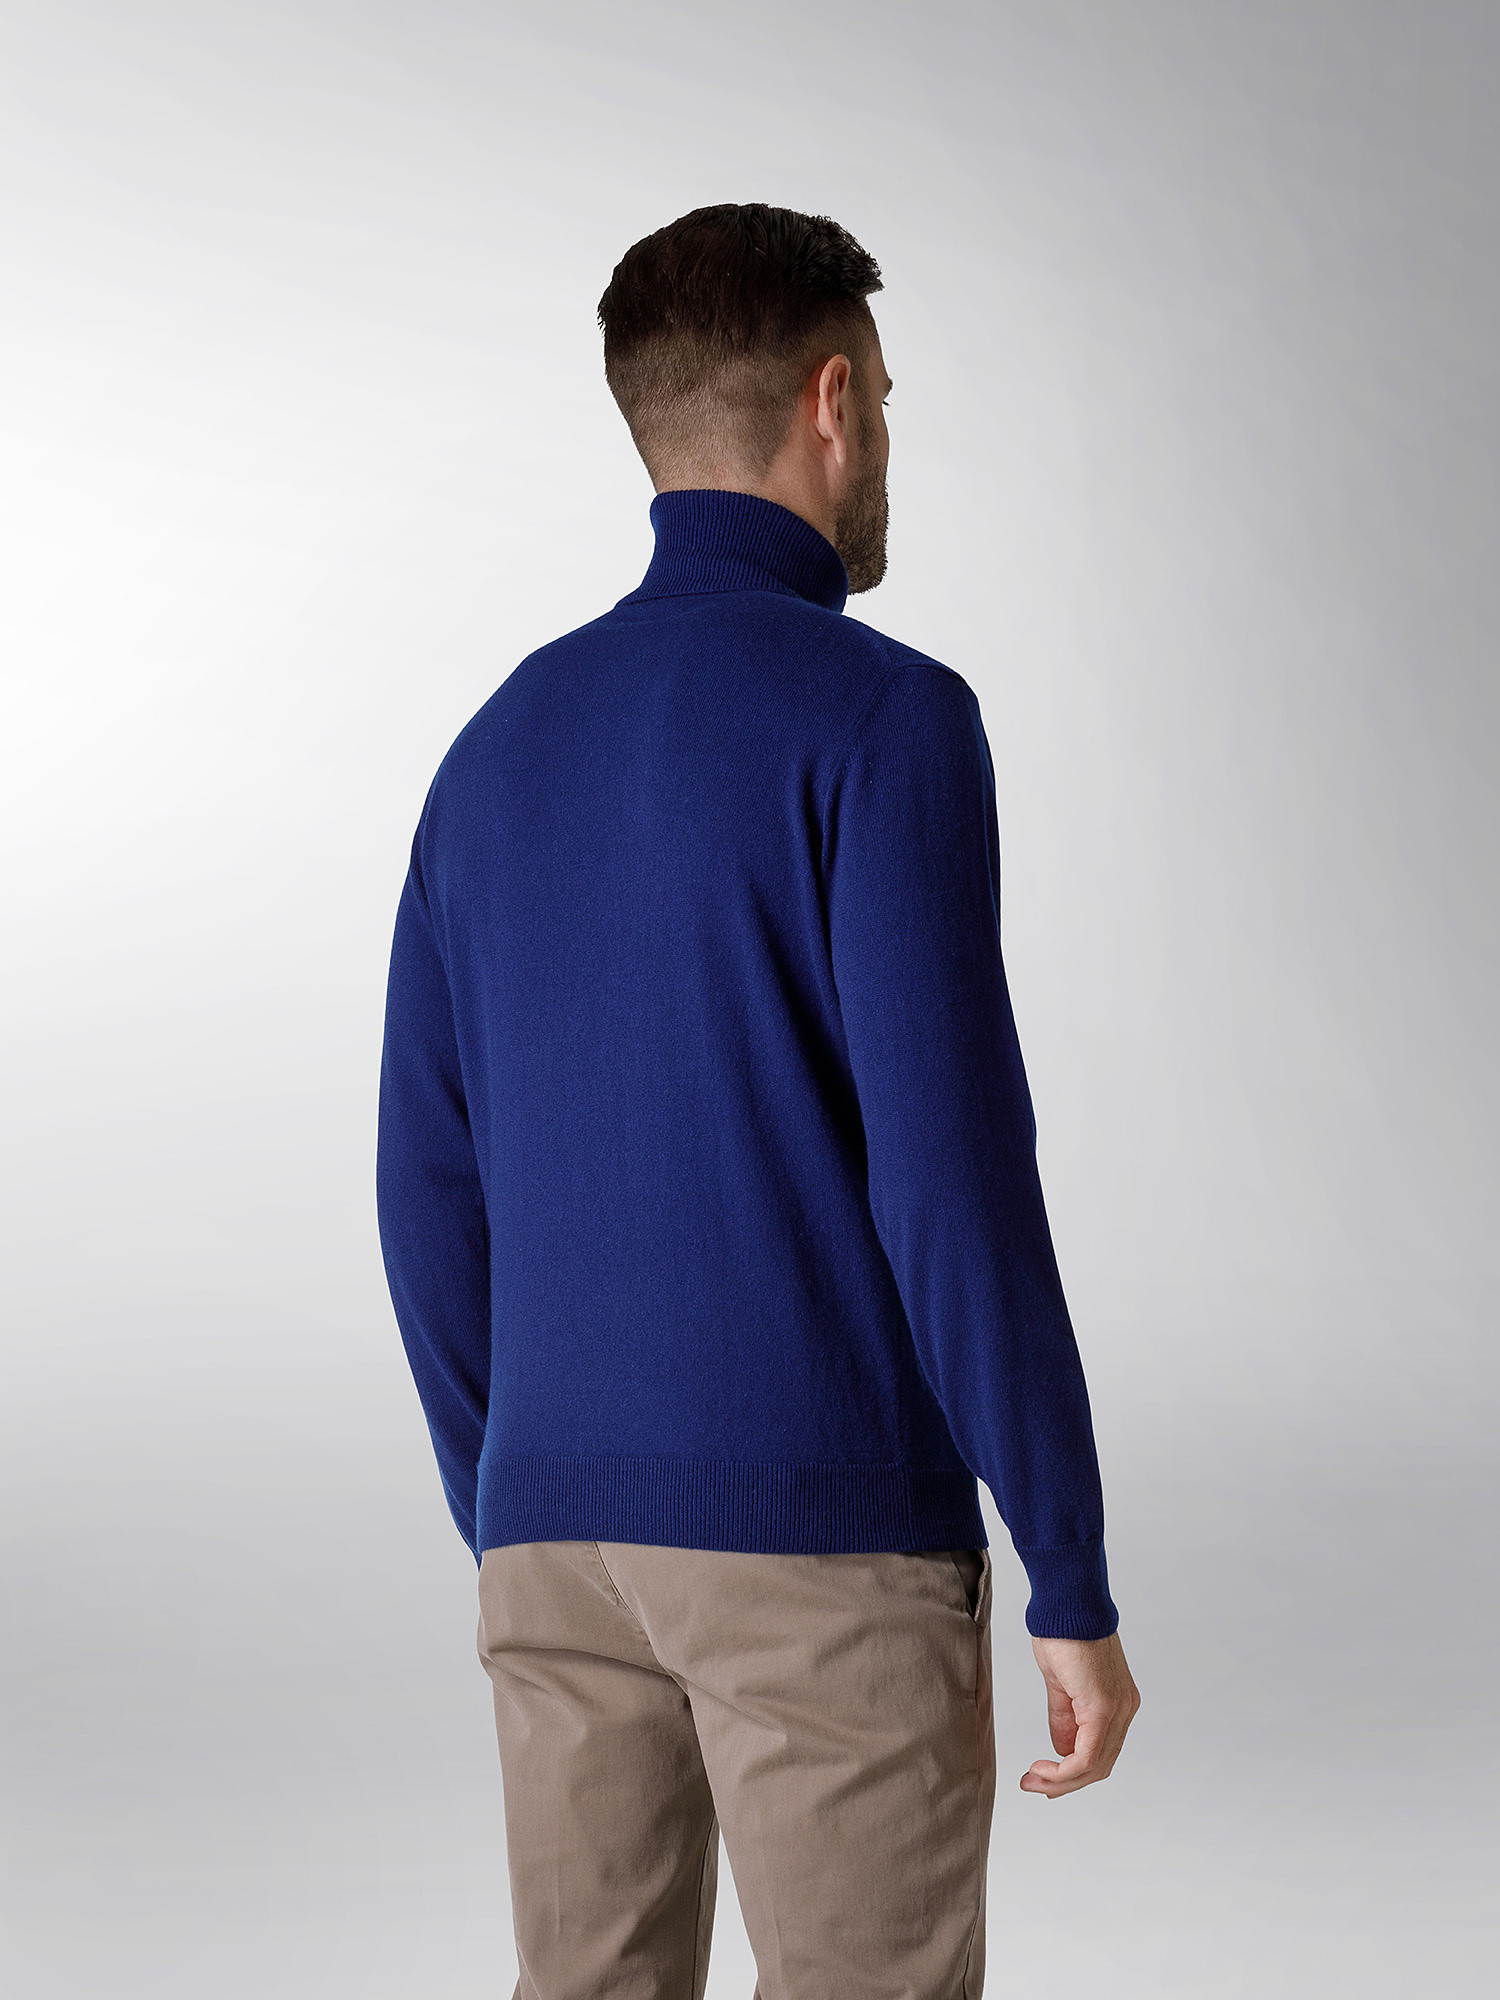 Coin Cashmere - Turtleneck in pure premium cashmere, Royal Blue, large image number 2